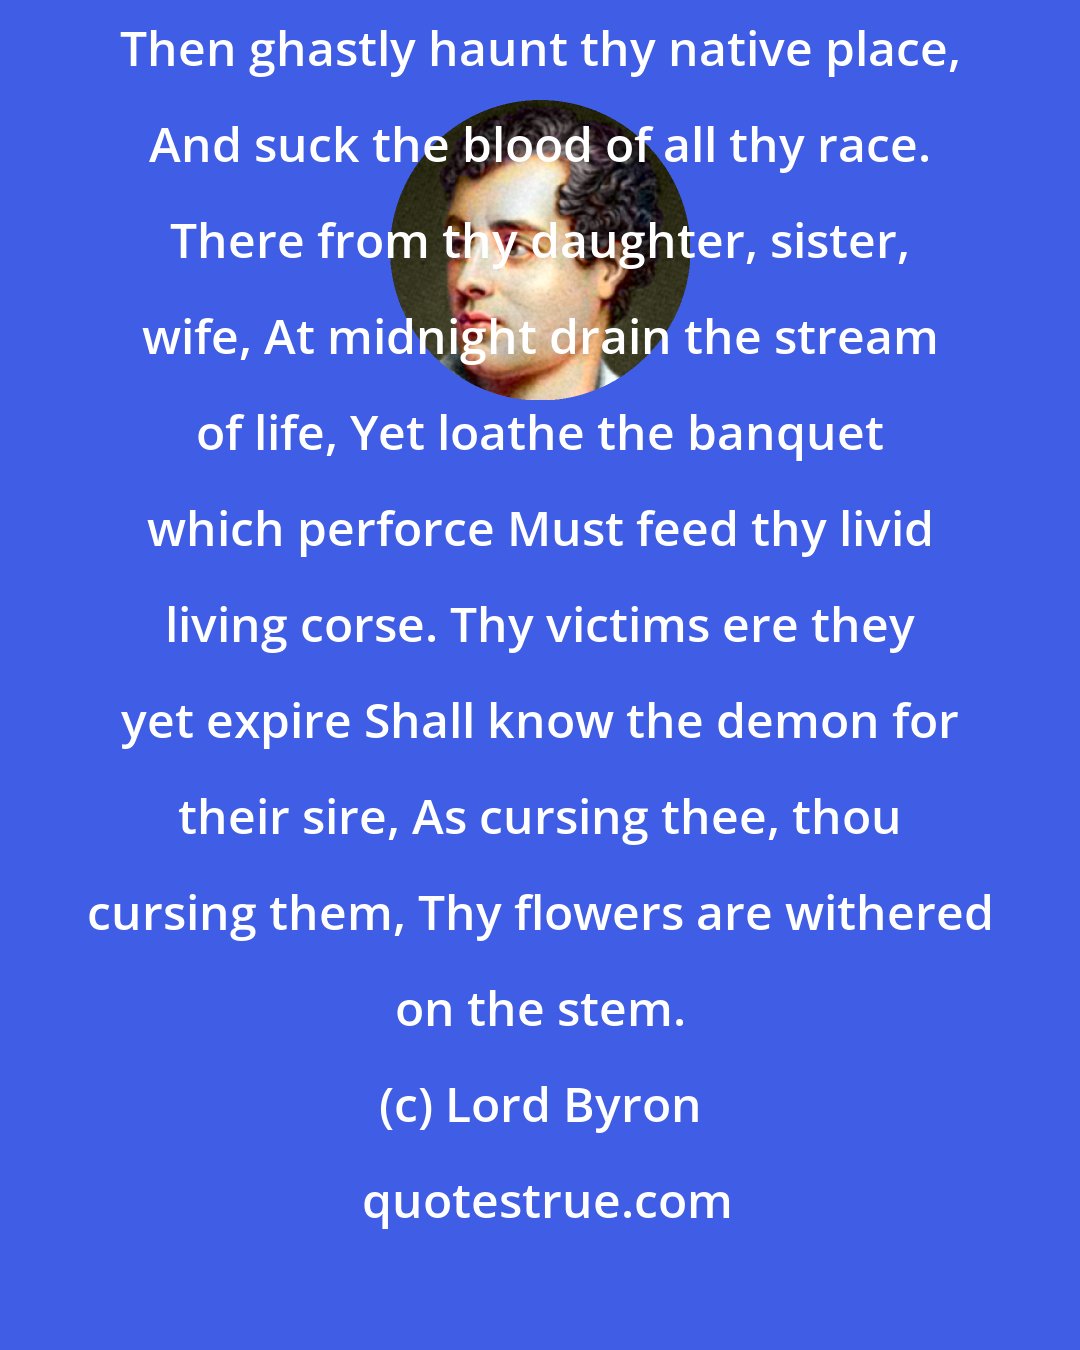 Lord Byron: But first, on earth as vampire sent, Thy corse shall from its tomb be rent, Then ghastly haunt thy native place, And suck the blood of all thy race. There from thy daughter, sister, wife, At midnight drain the stream of life, Yet loathe the banquet which perforce Must feed thy livid living corse. Thy victims ere they yet expire Shall know the demon for their sire, As cursing thee, thou cursing them, Thy flowers are withered on the stem.